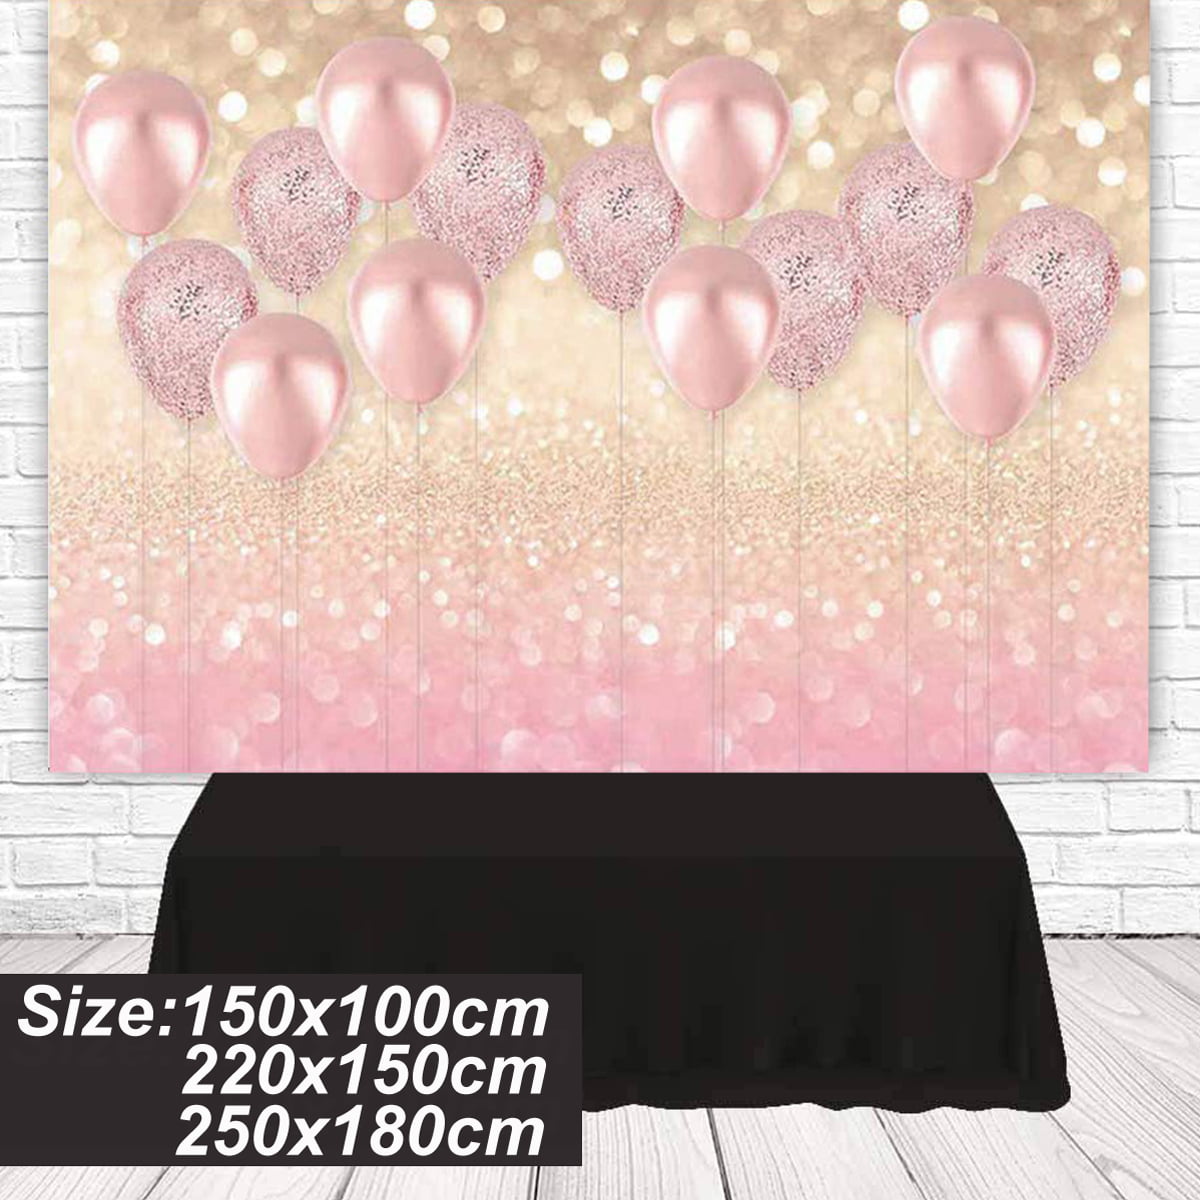 Vinyl Photography Backdrops Newborn Boy or Girl Bokeh Photographic Background Shower Decorations Photocall Background Props-250x180CM